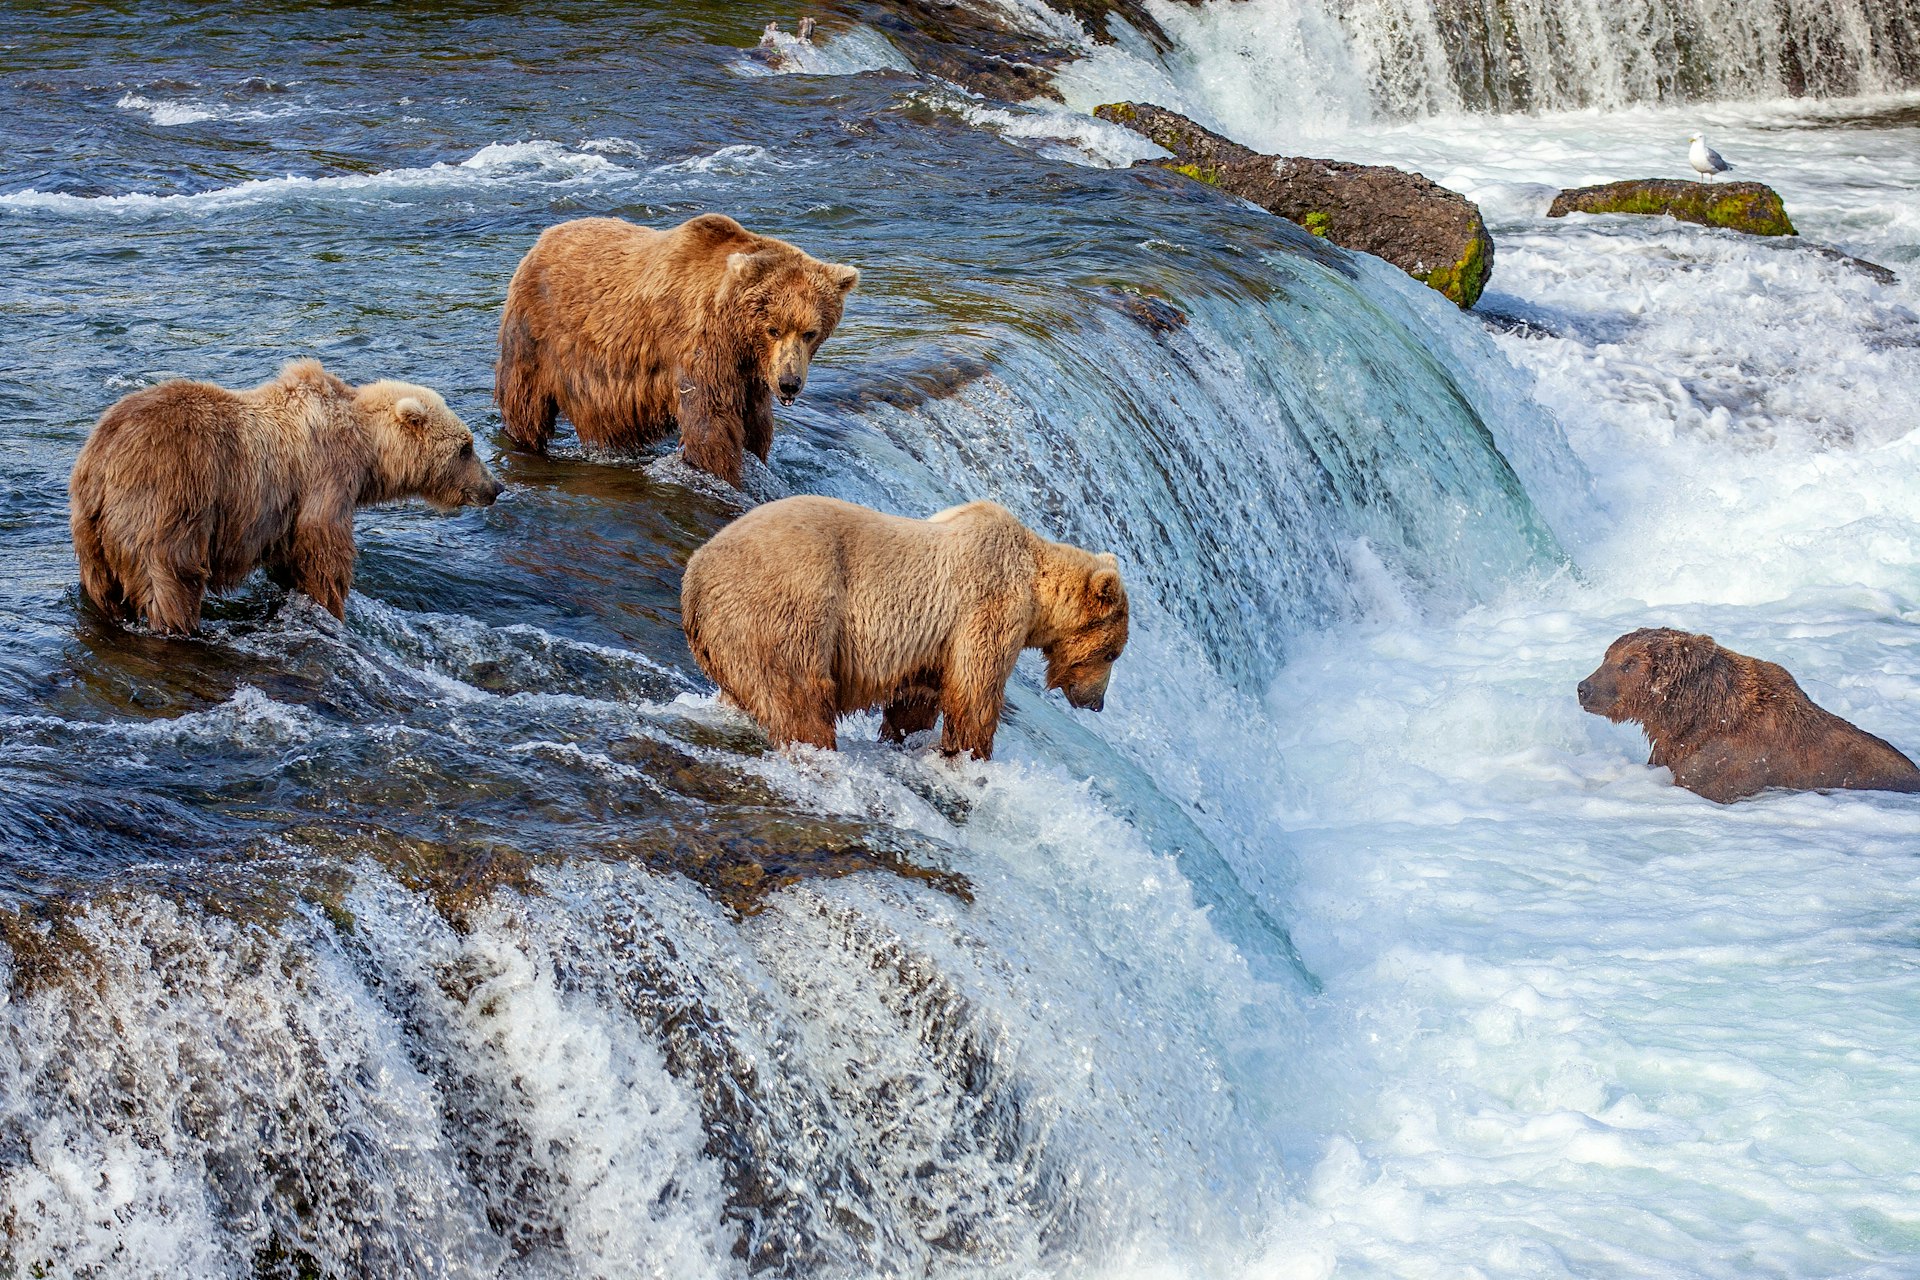 Grizzly bears stand in a river waiting for fish to leap into their mouths